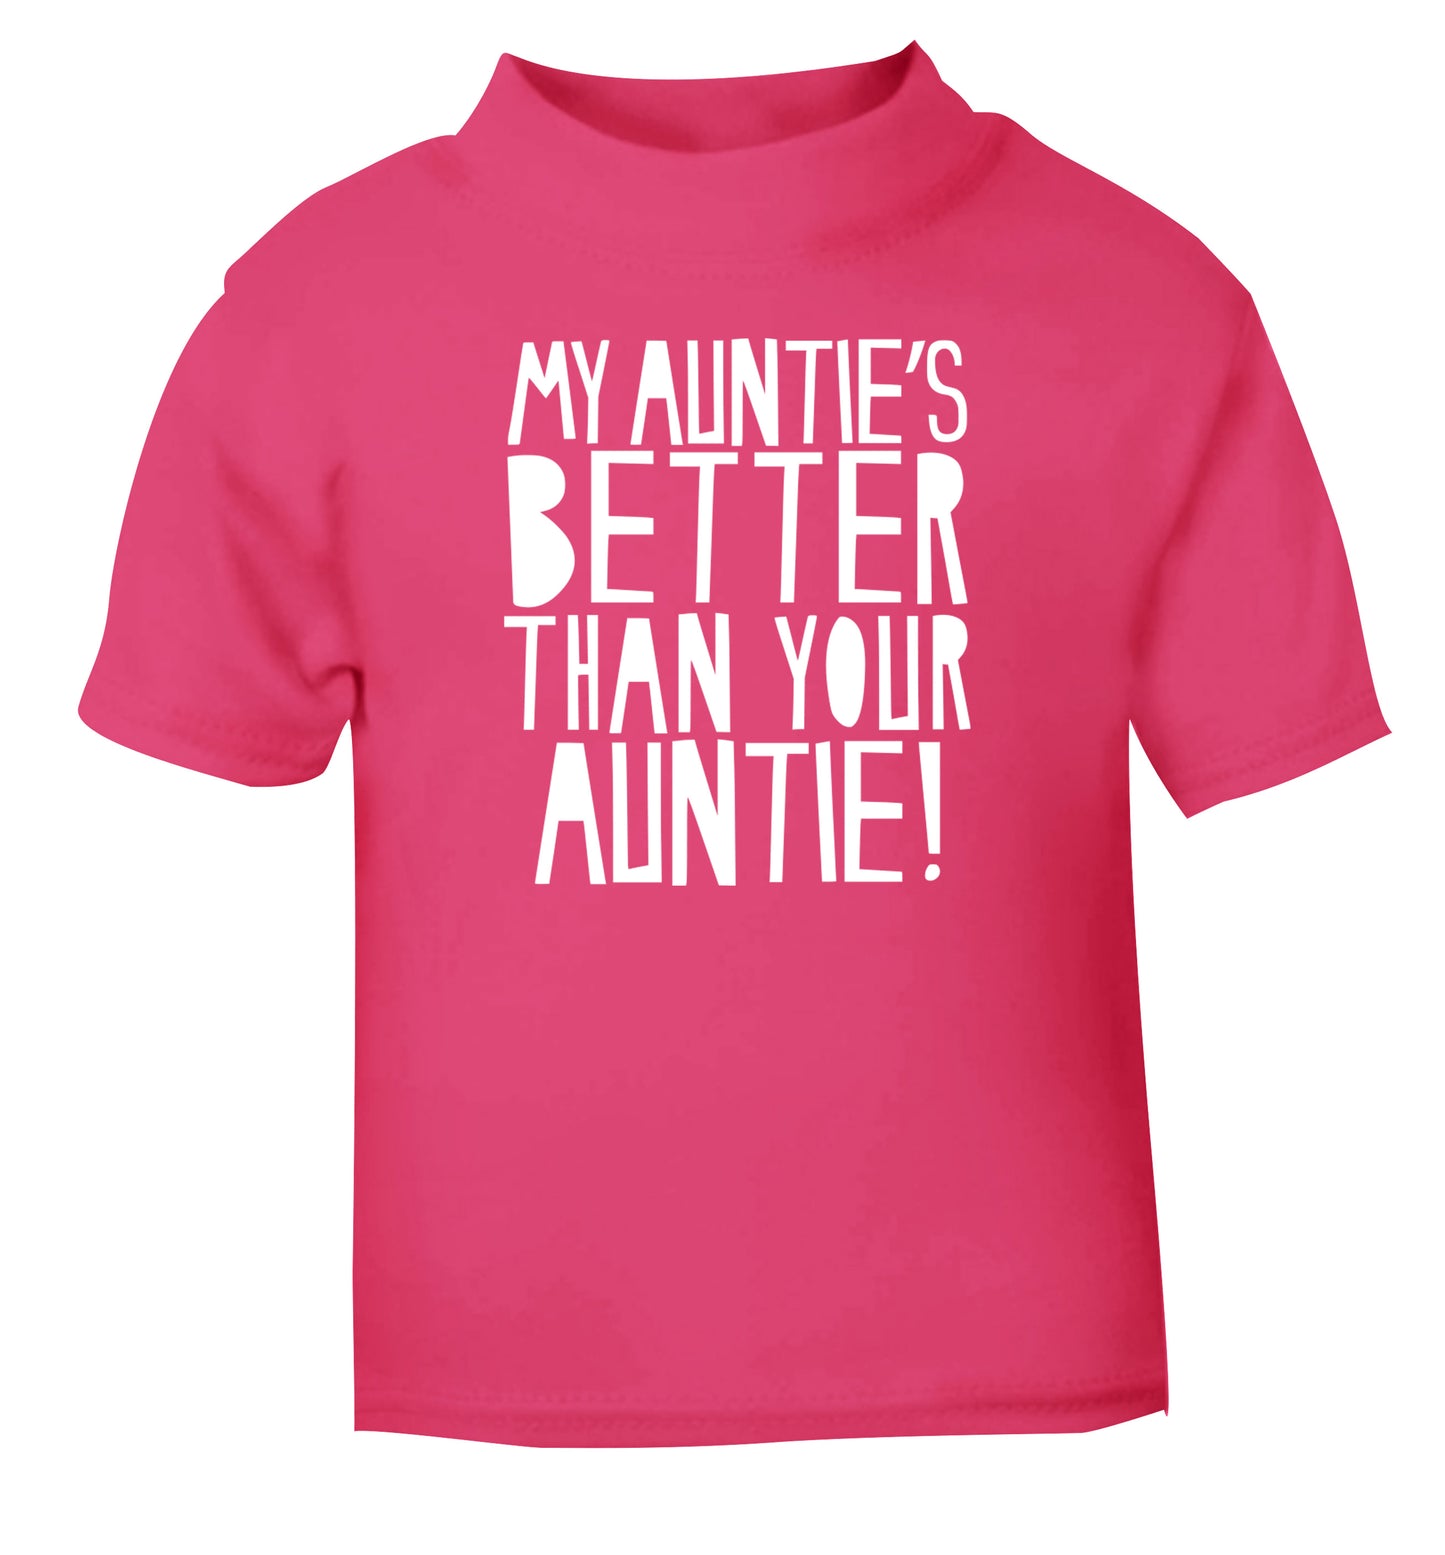 My auntie's better than your auntie pink Baby Toddler Tshirt 2 Years